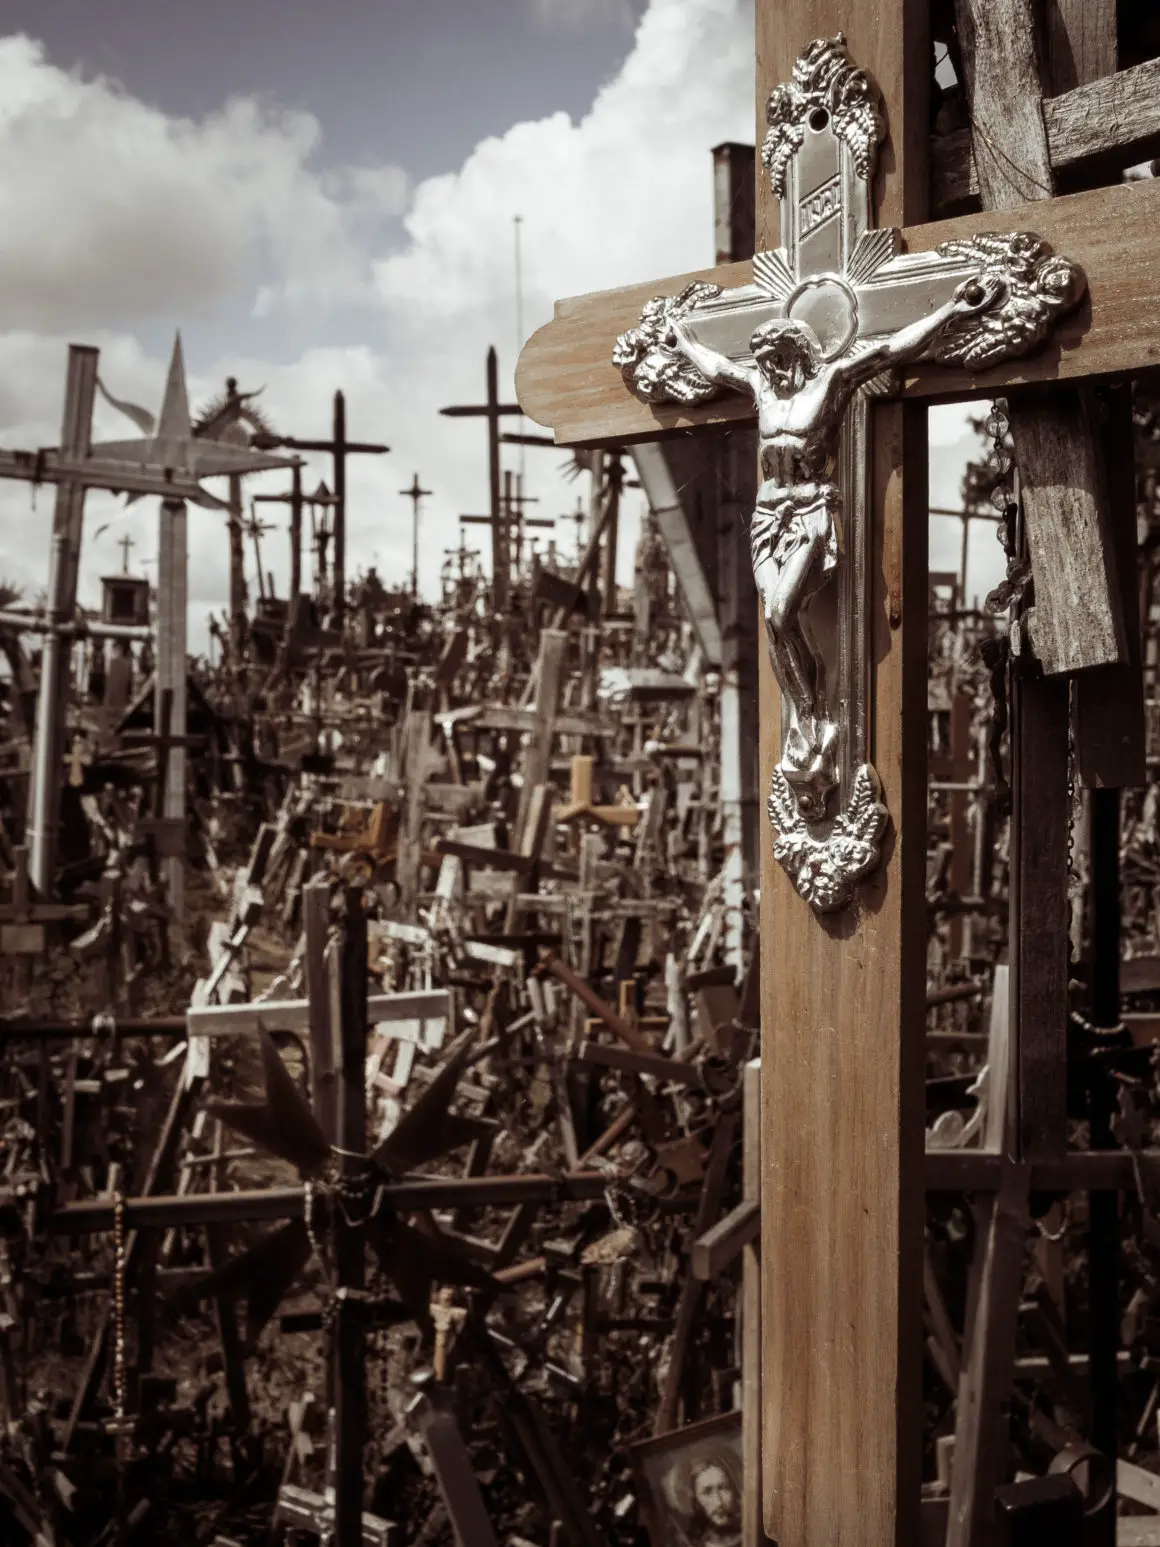 Hill of Crosses in Lithuania on July 22, 2019